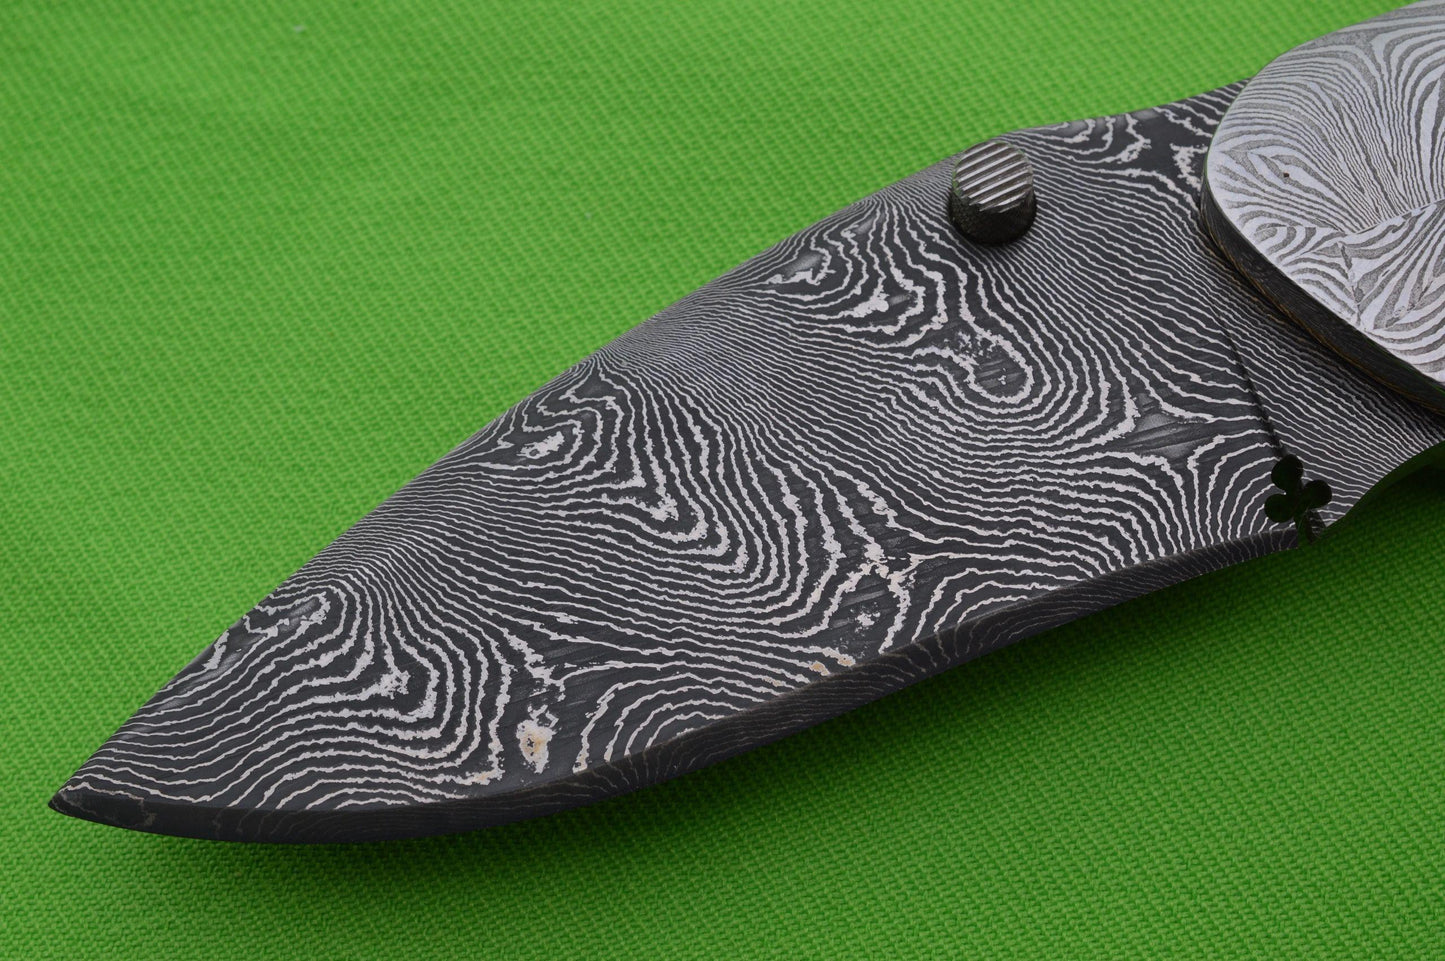 Peter Martin Spring-Assisted Damascus and Pearl Liner-Lock Folding Knife